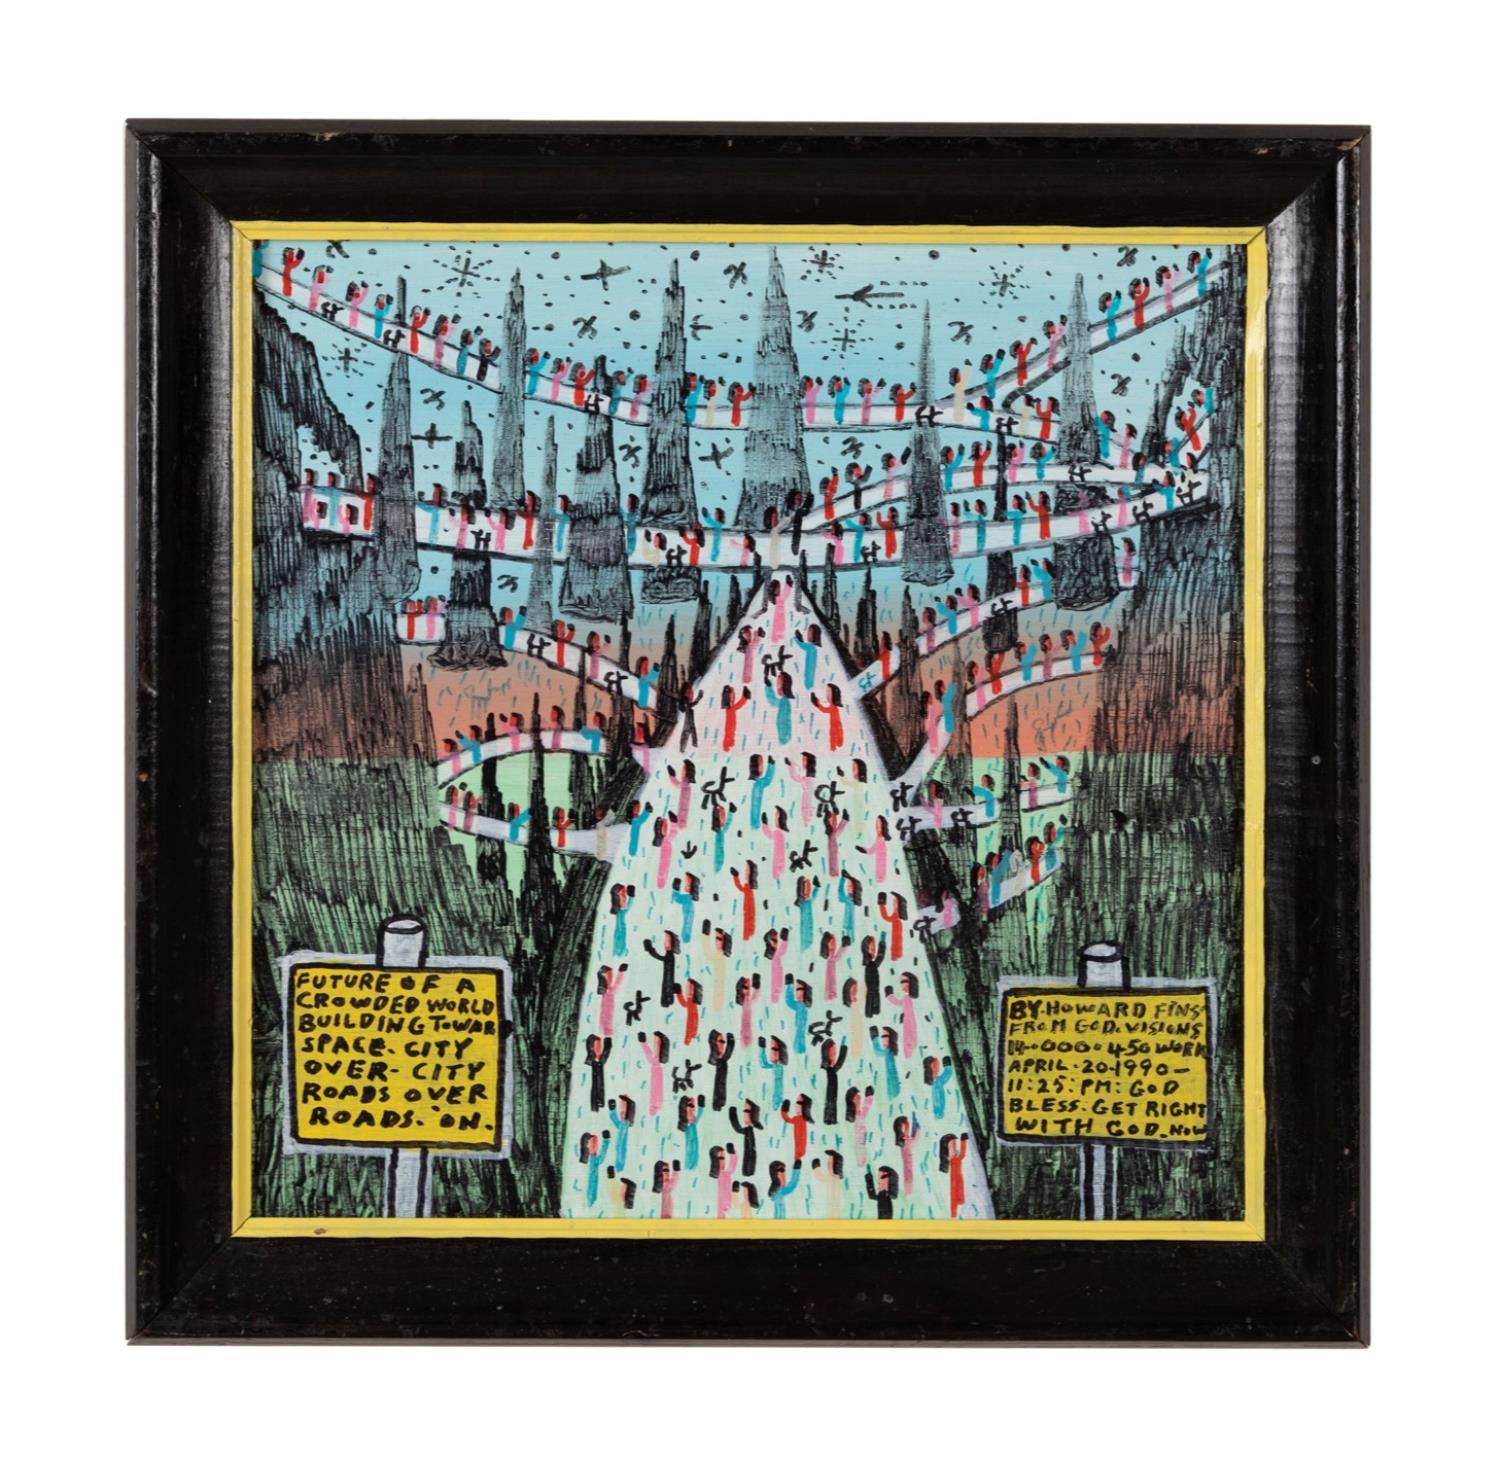 HOWARD FINSTER FUTURE OF A CROWDED 354eac